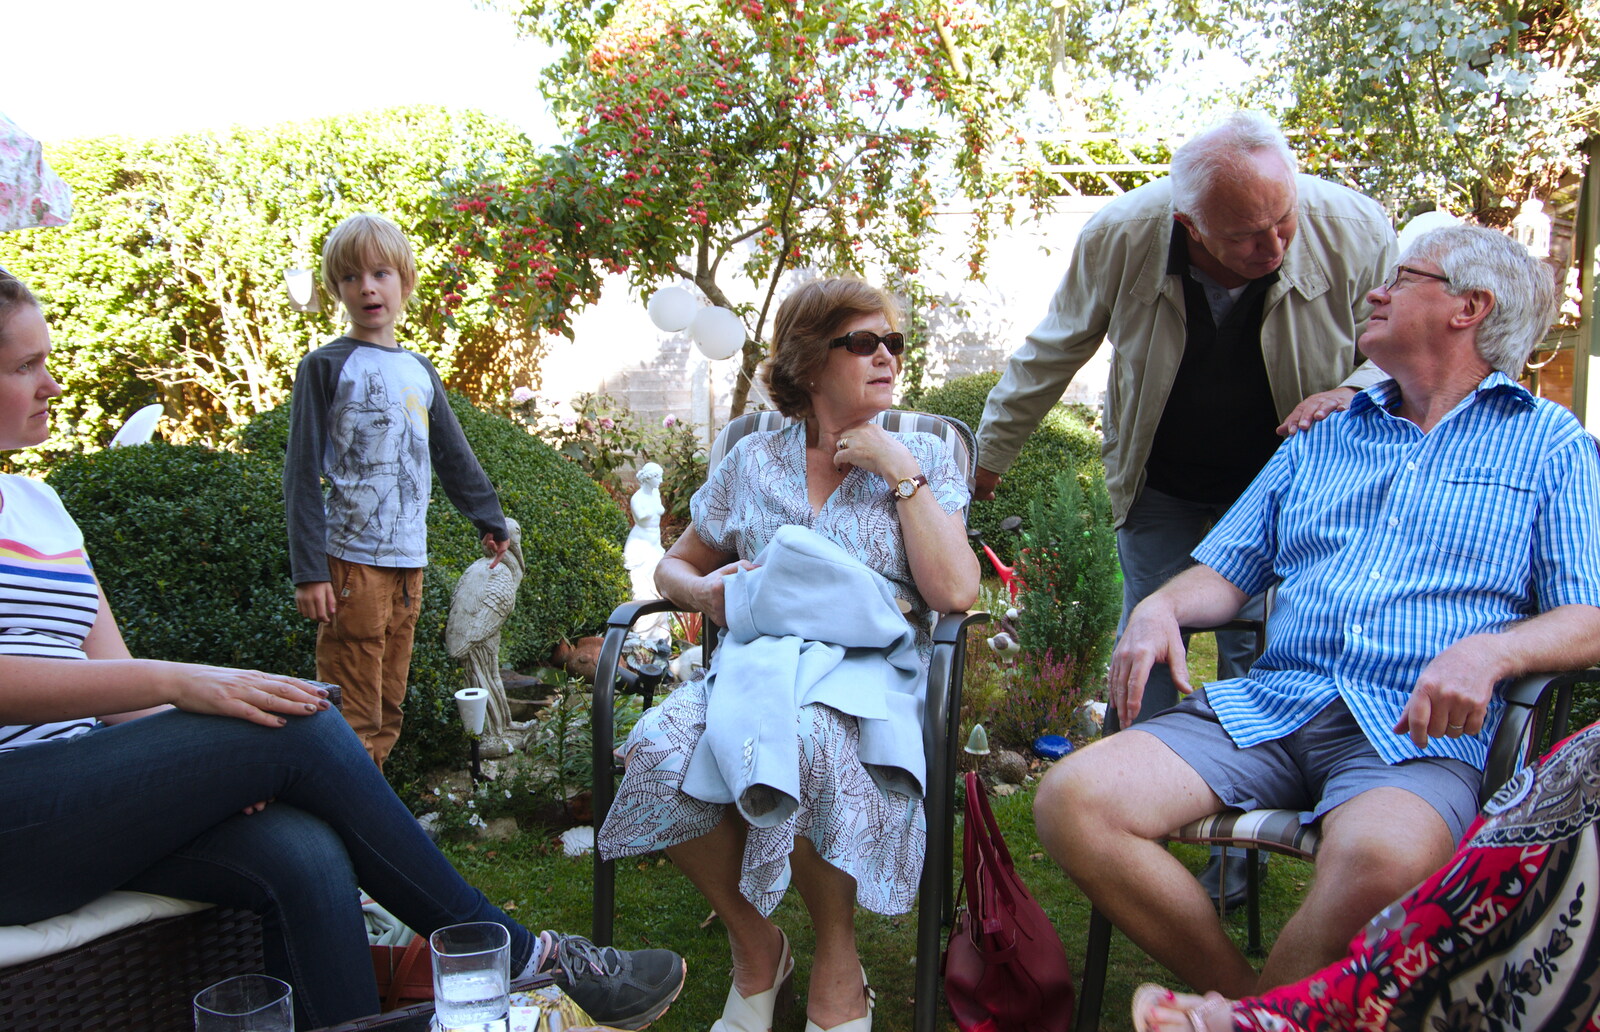 We hang out in the garden with relatives from A Day with Sean and Michelle, Walkford, Dorset - 21st September 2019